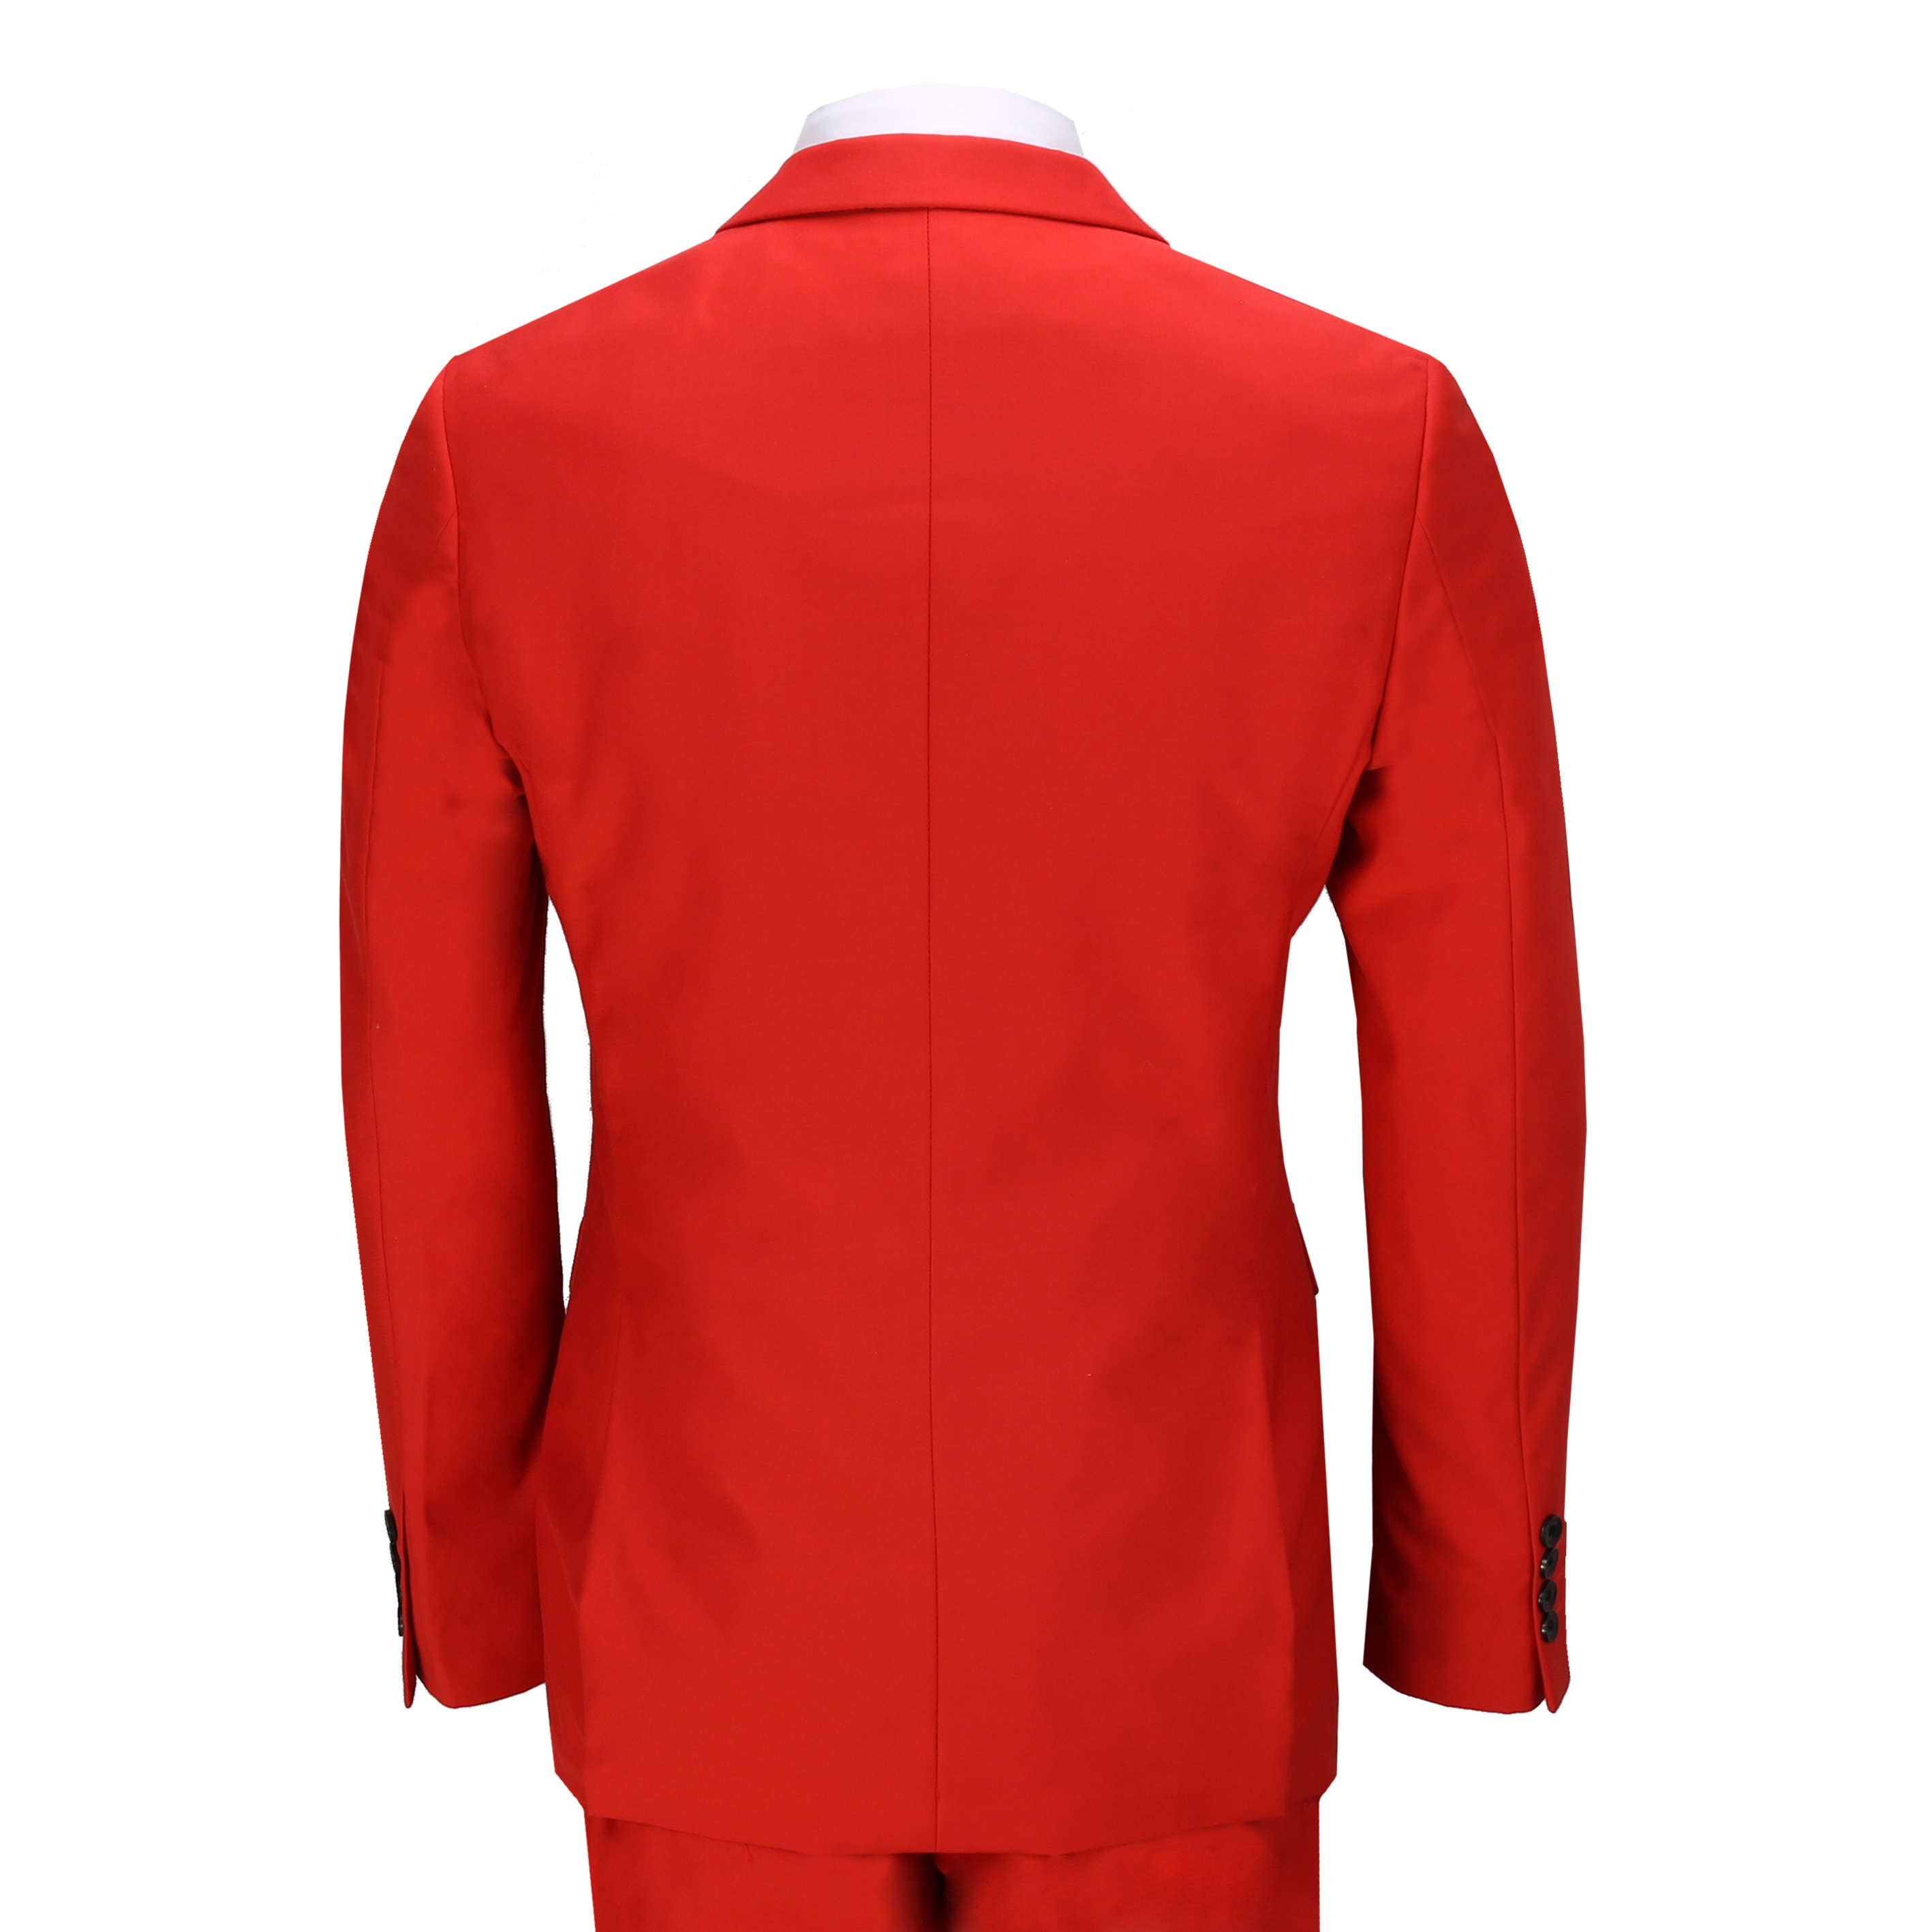 Mens 3 Piece Suit In Red Smart Formal Wedding Party Retro Tailored Fit Jacket